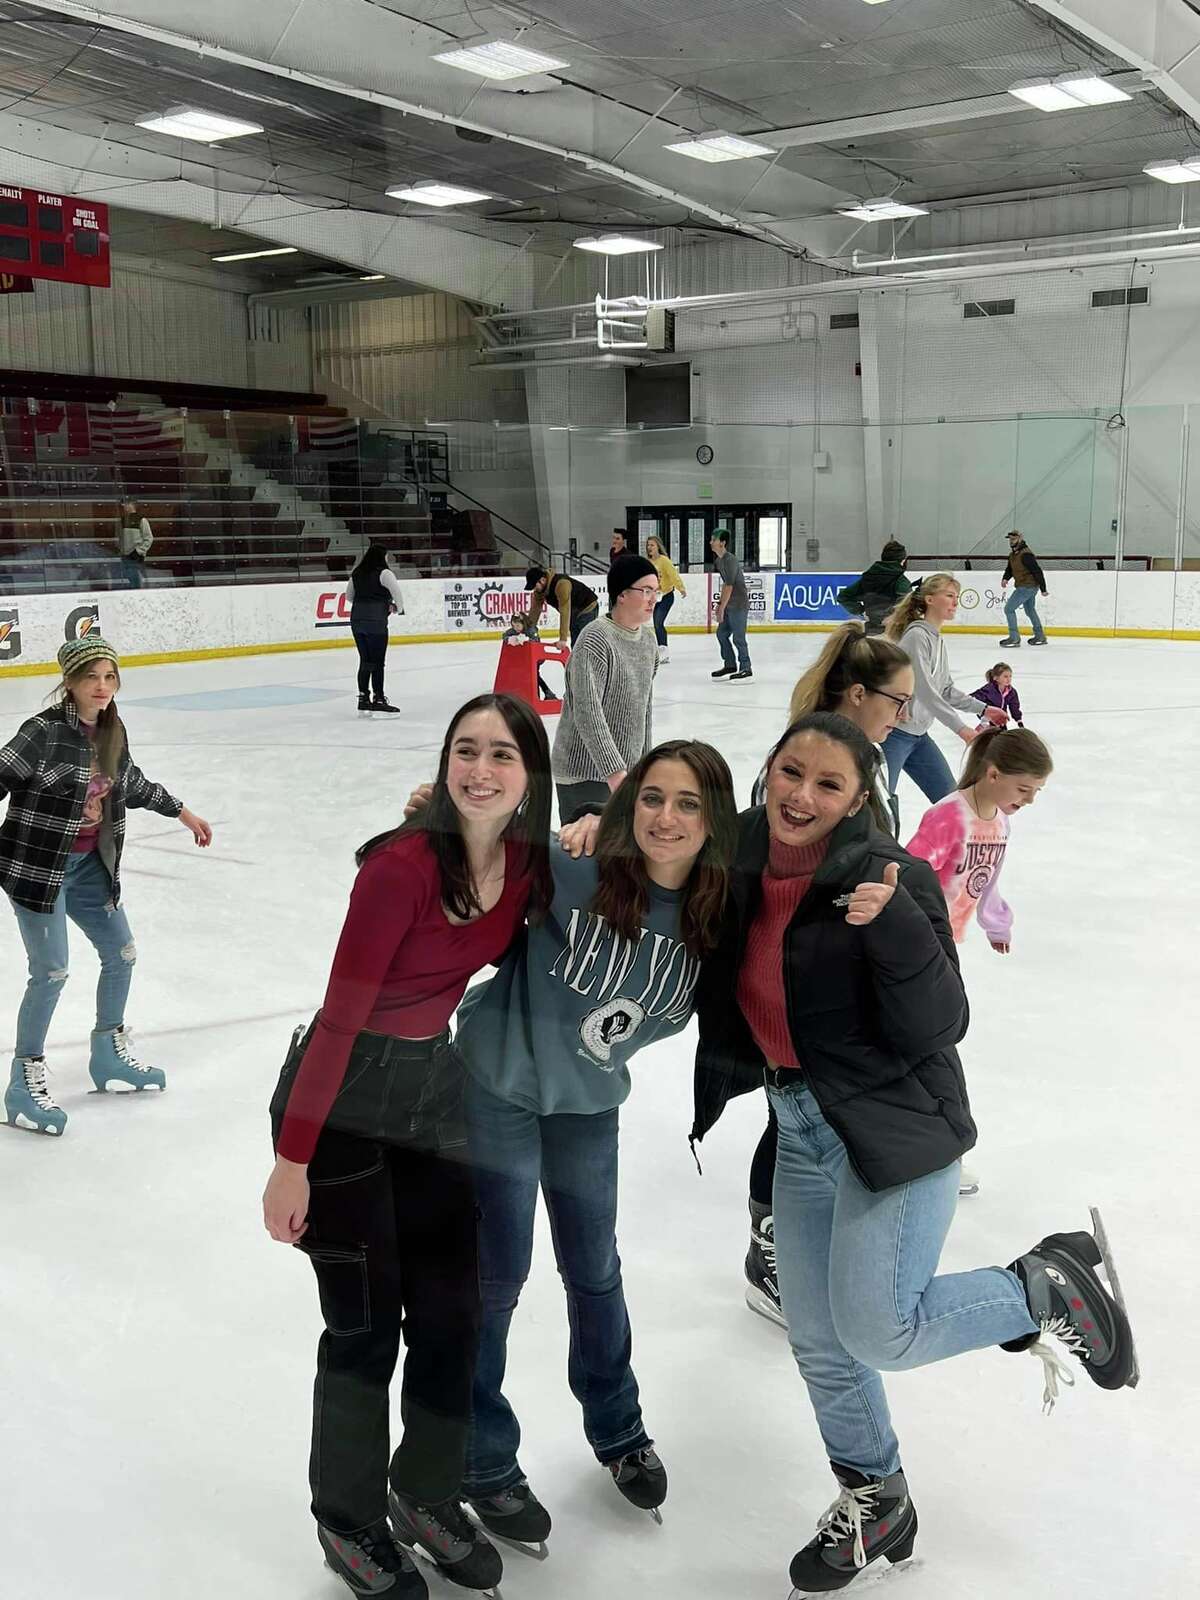 Rogers brought some of her exchange students to Ferris State University's ice skating rink, some of them had never skated before. To view more photos, visit: bigrapidsnews.com.